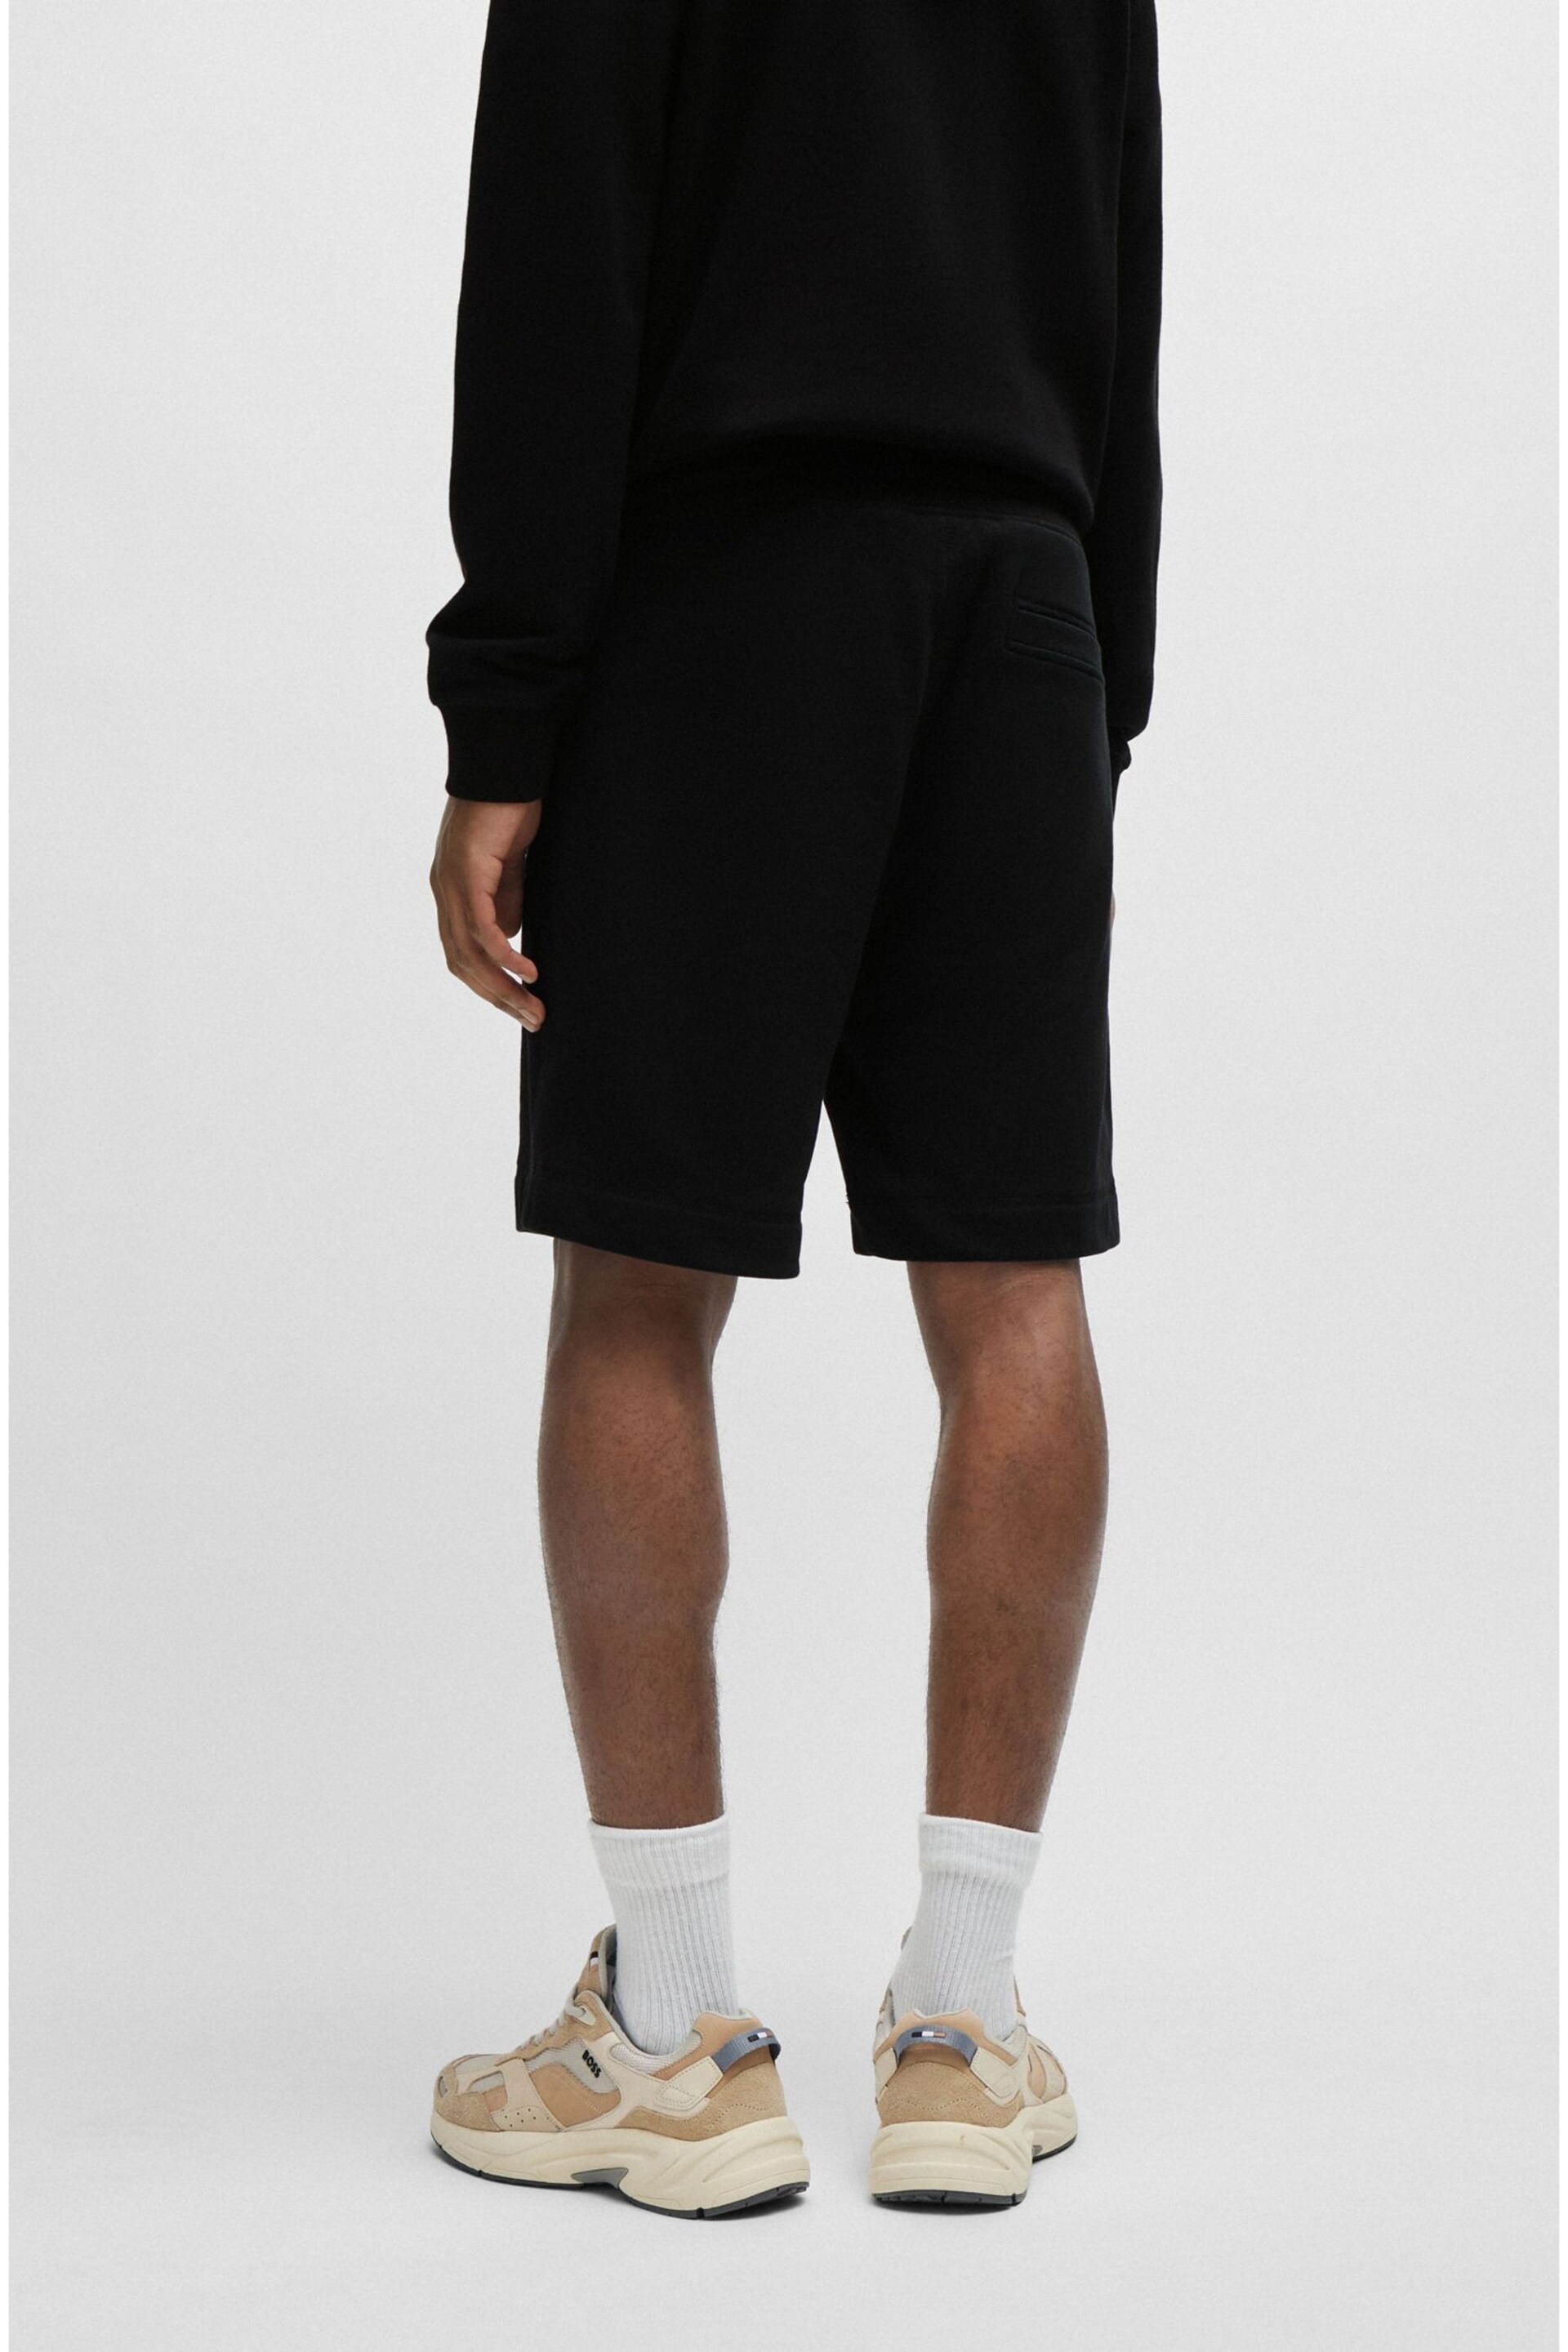 BOSS Black Cotton-Terry Regular-Fit Shorts With Logo Badge - Image 2 of 6